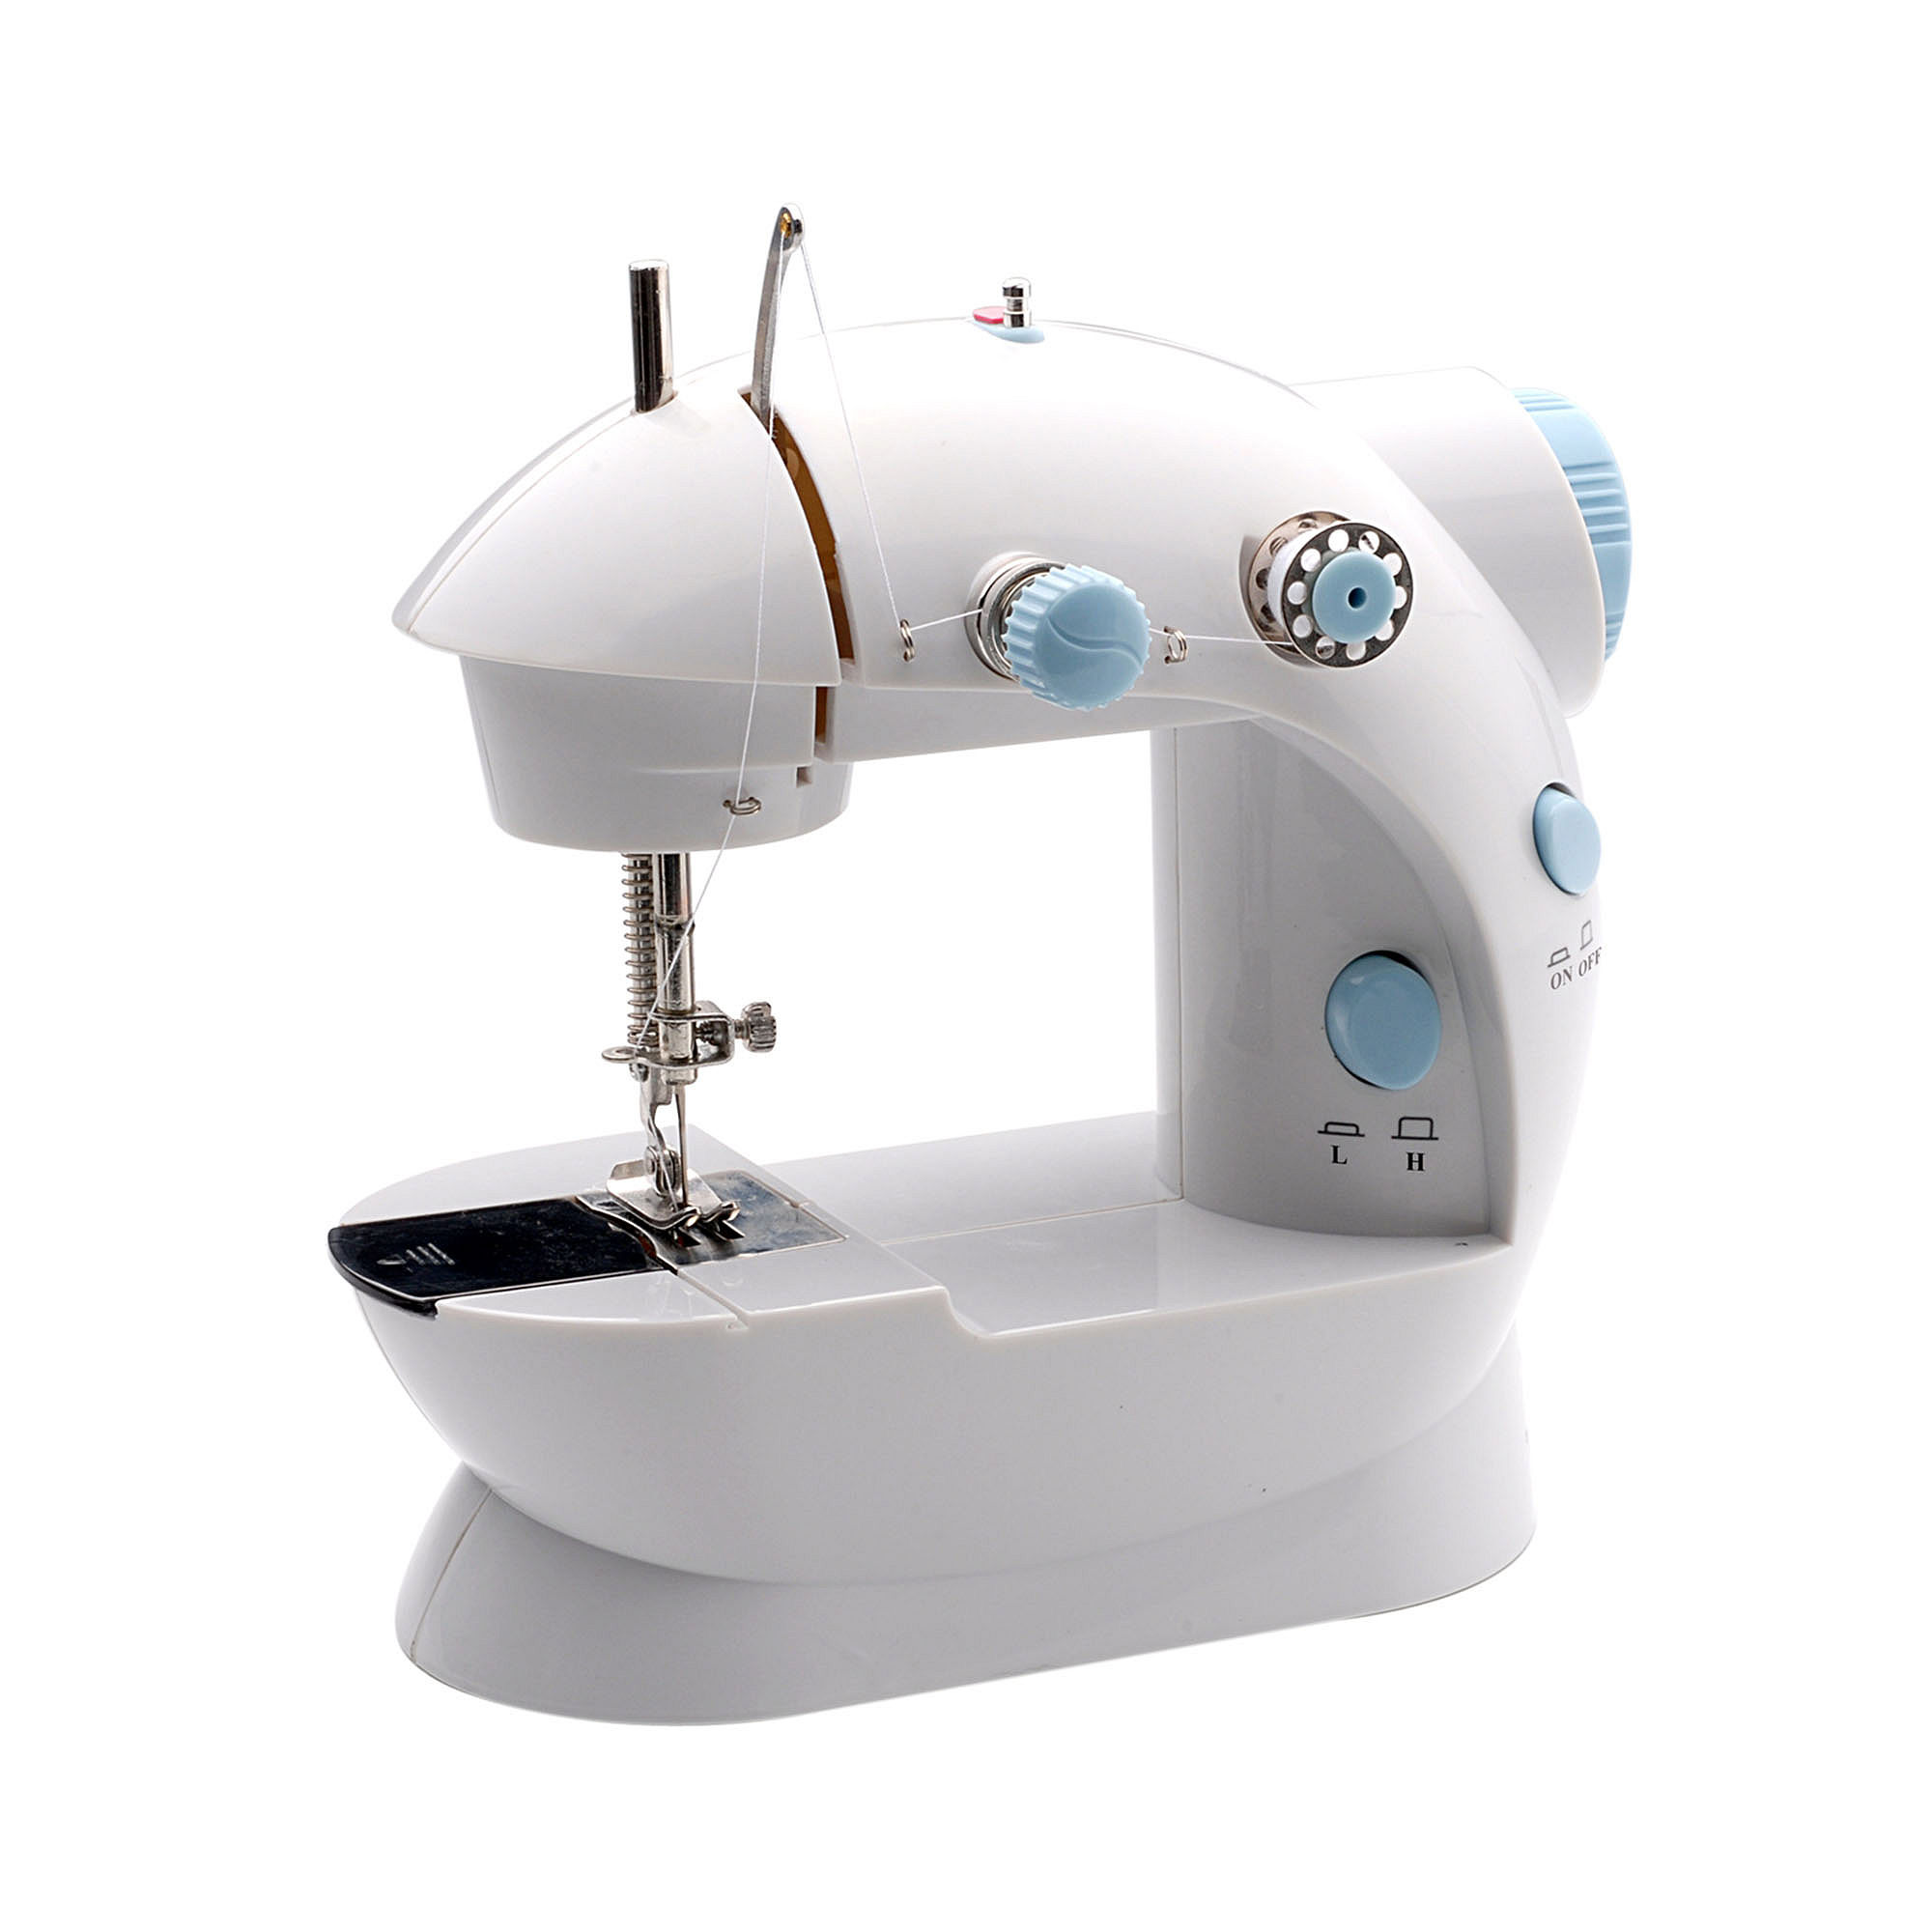 Michley LSS-202 Portable Sewing Machine